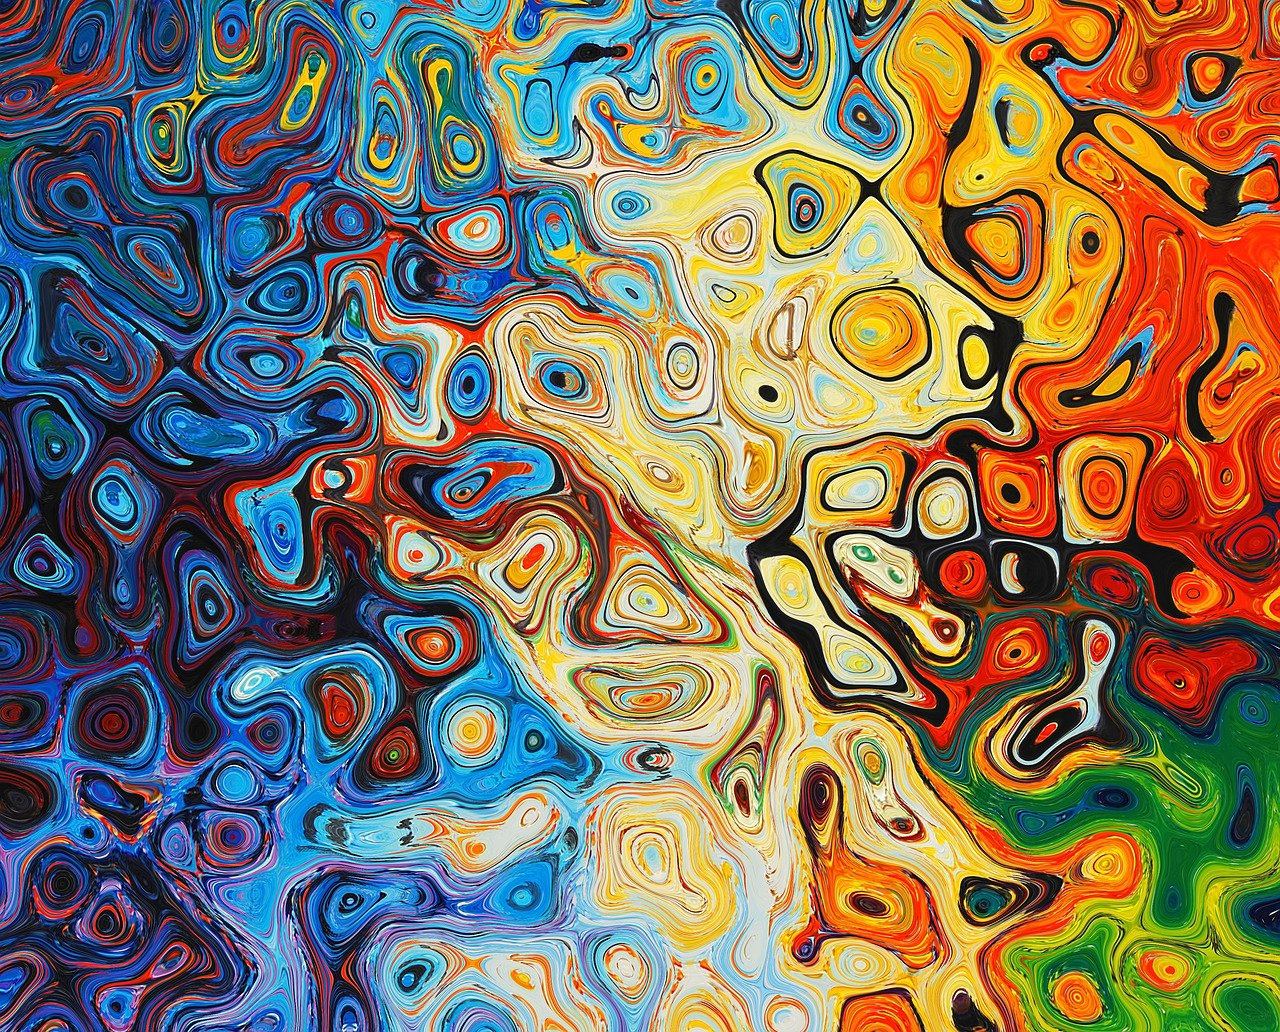 a close up of a painting of different colors, inspired by André Masson, pexels, generative art, dmt ripples, incredibly detailed oil painting, oil in canvas style, colorful mosaic